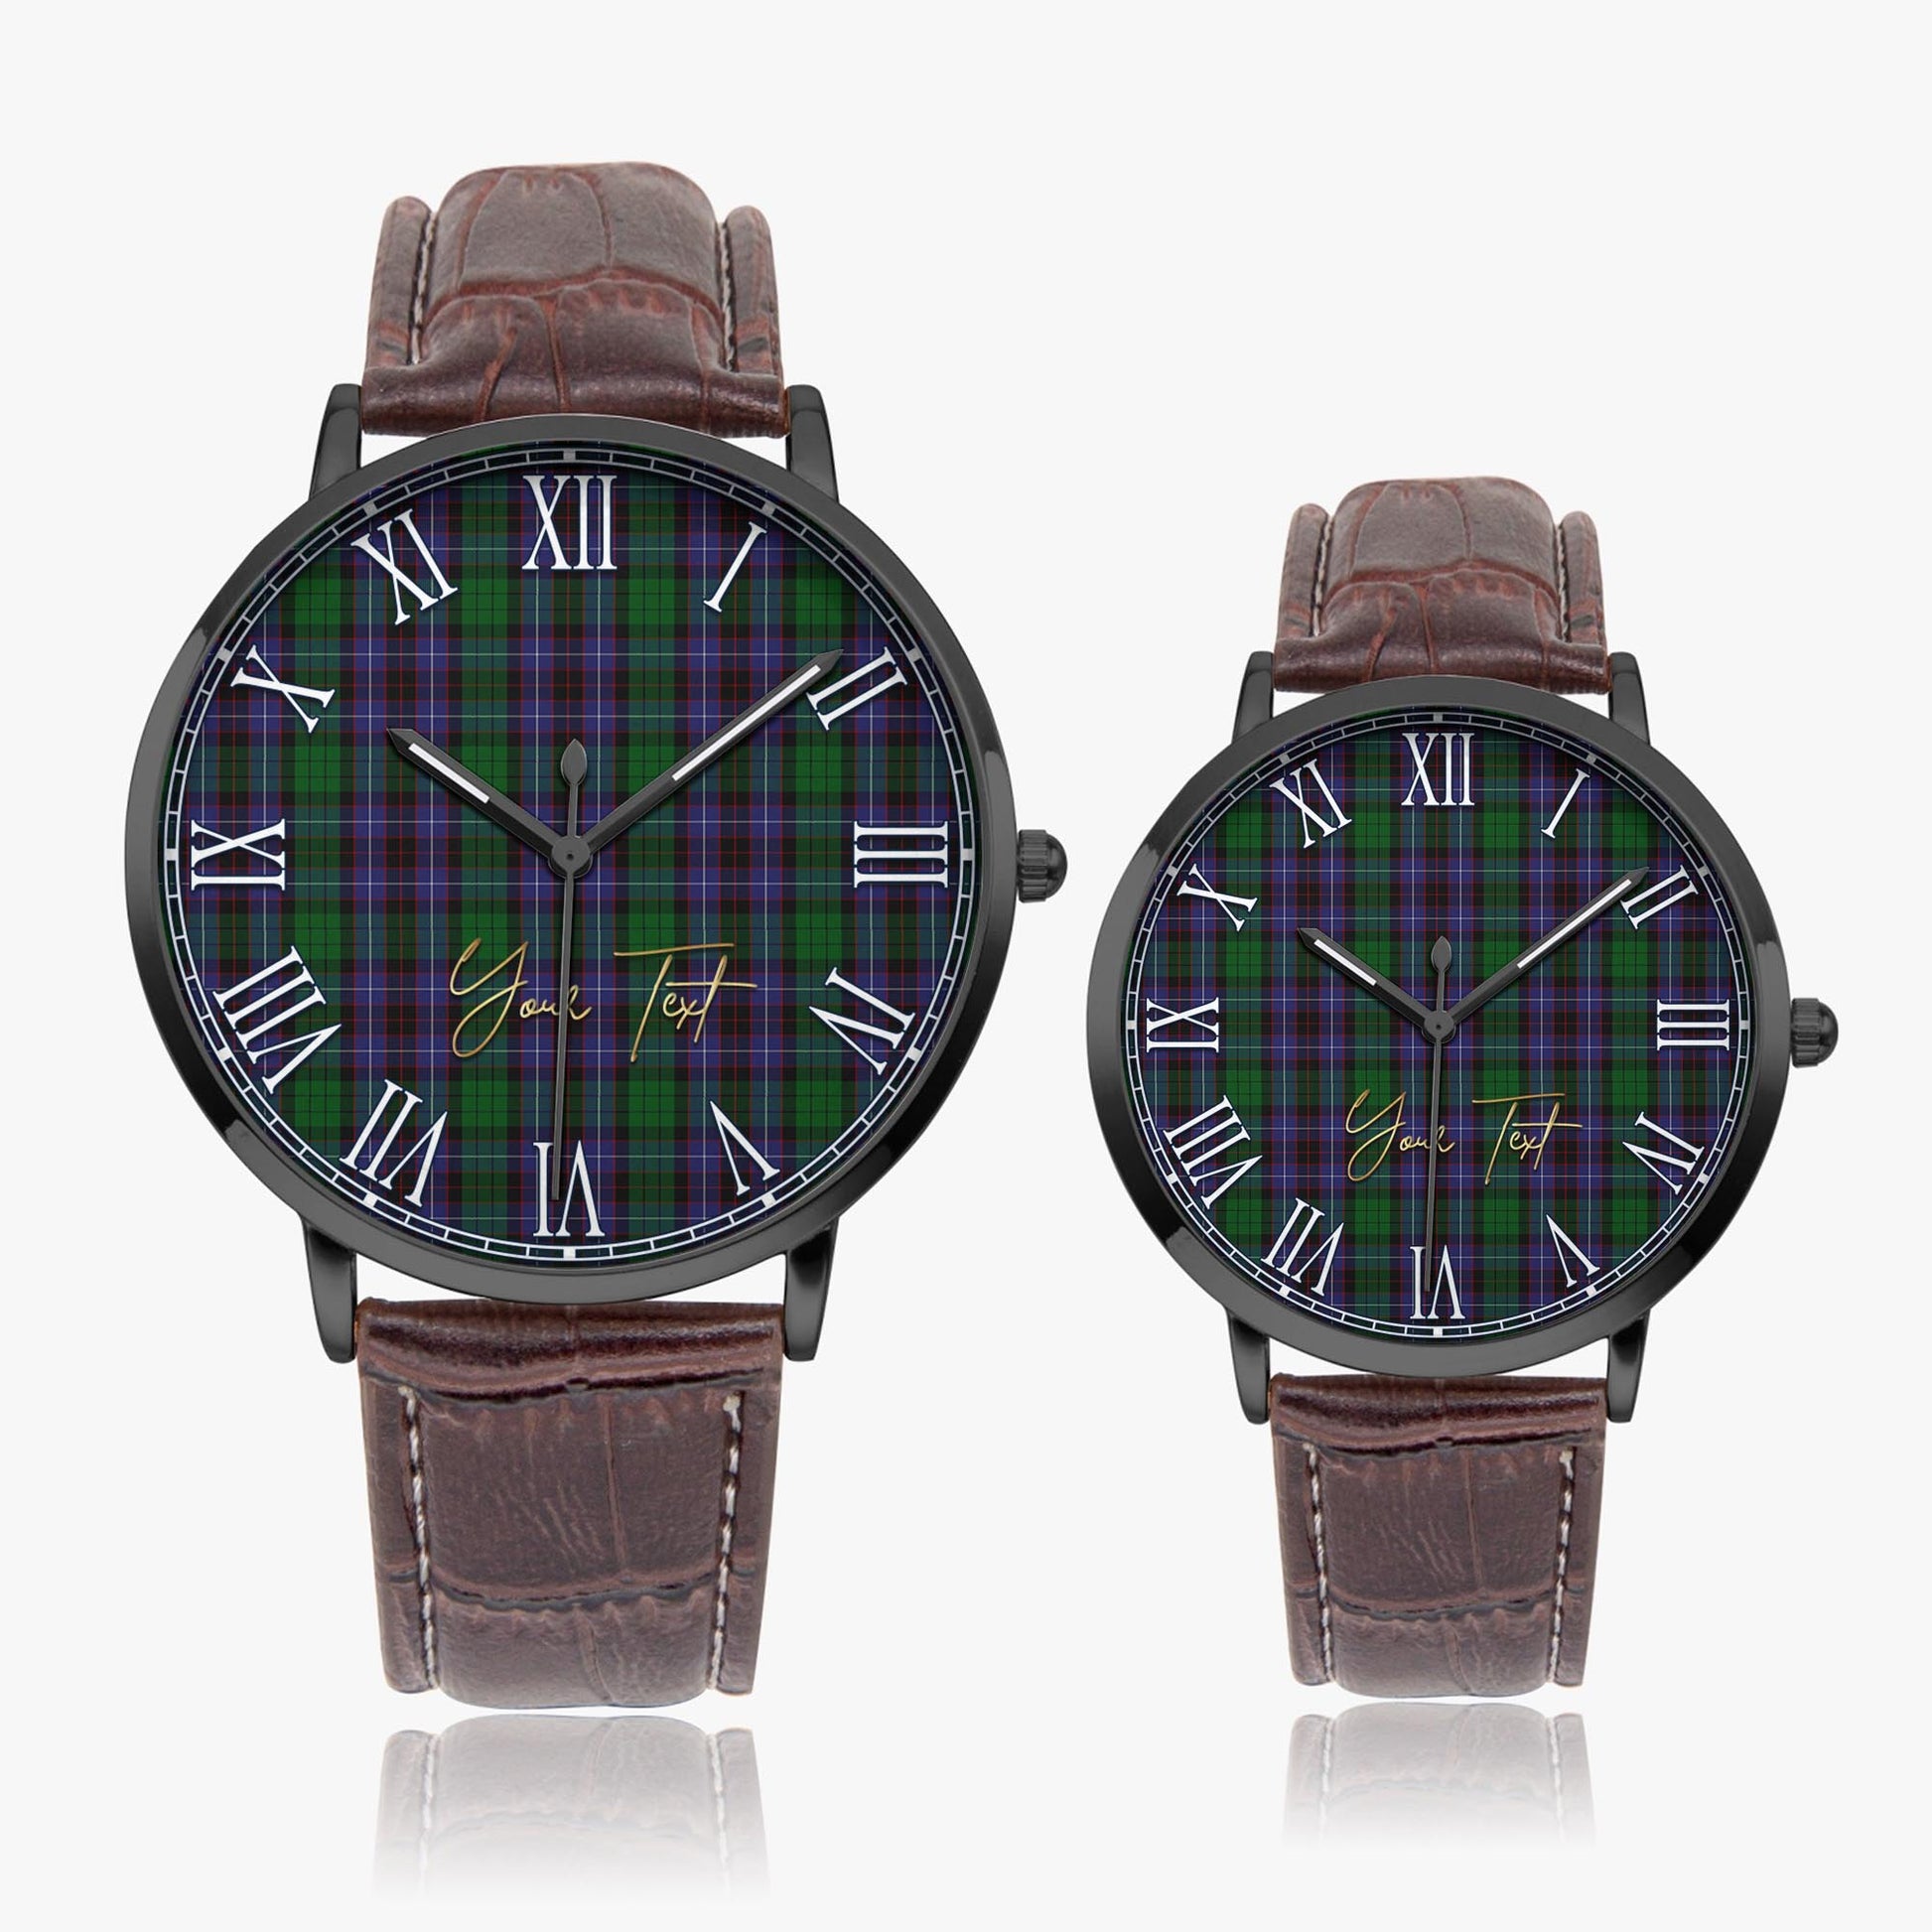 Hunter of Peebleshire Tartan Personalized Your Text Leather Trap Quartz Watch Ultra Thin Black Case With Brown Leather Strap - Tartanvibesclothing